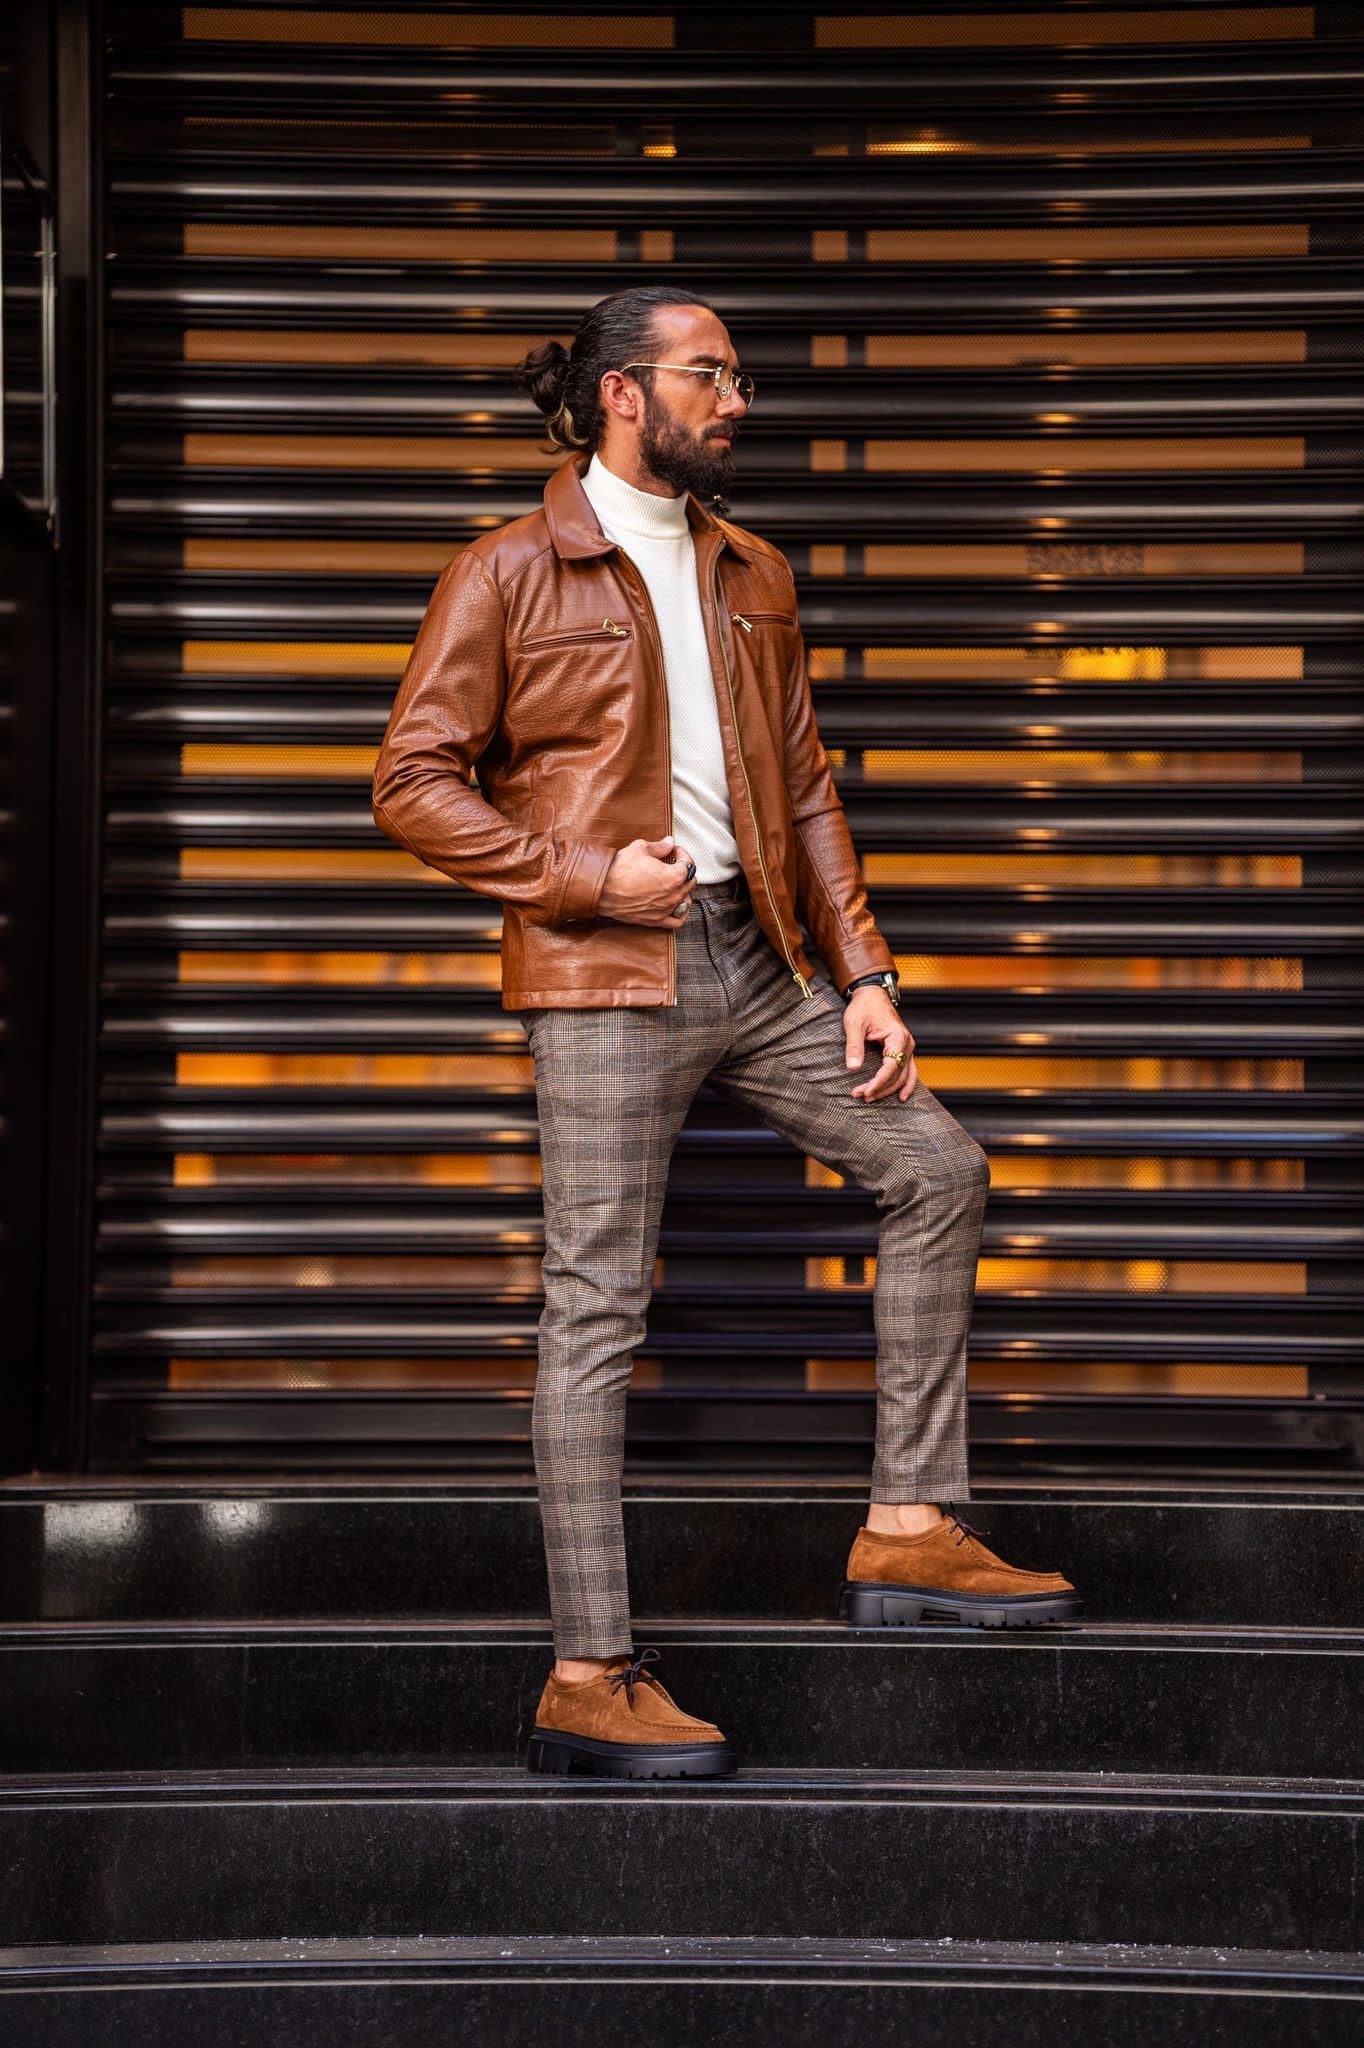 Mateo Slim Fit Tan Patterned Leather Coat